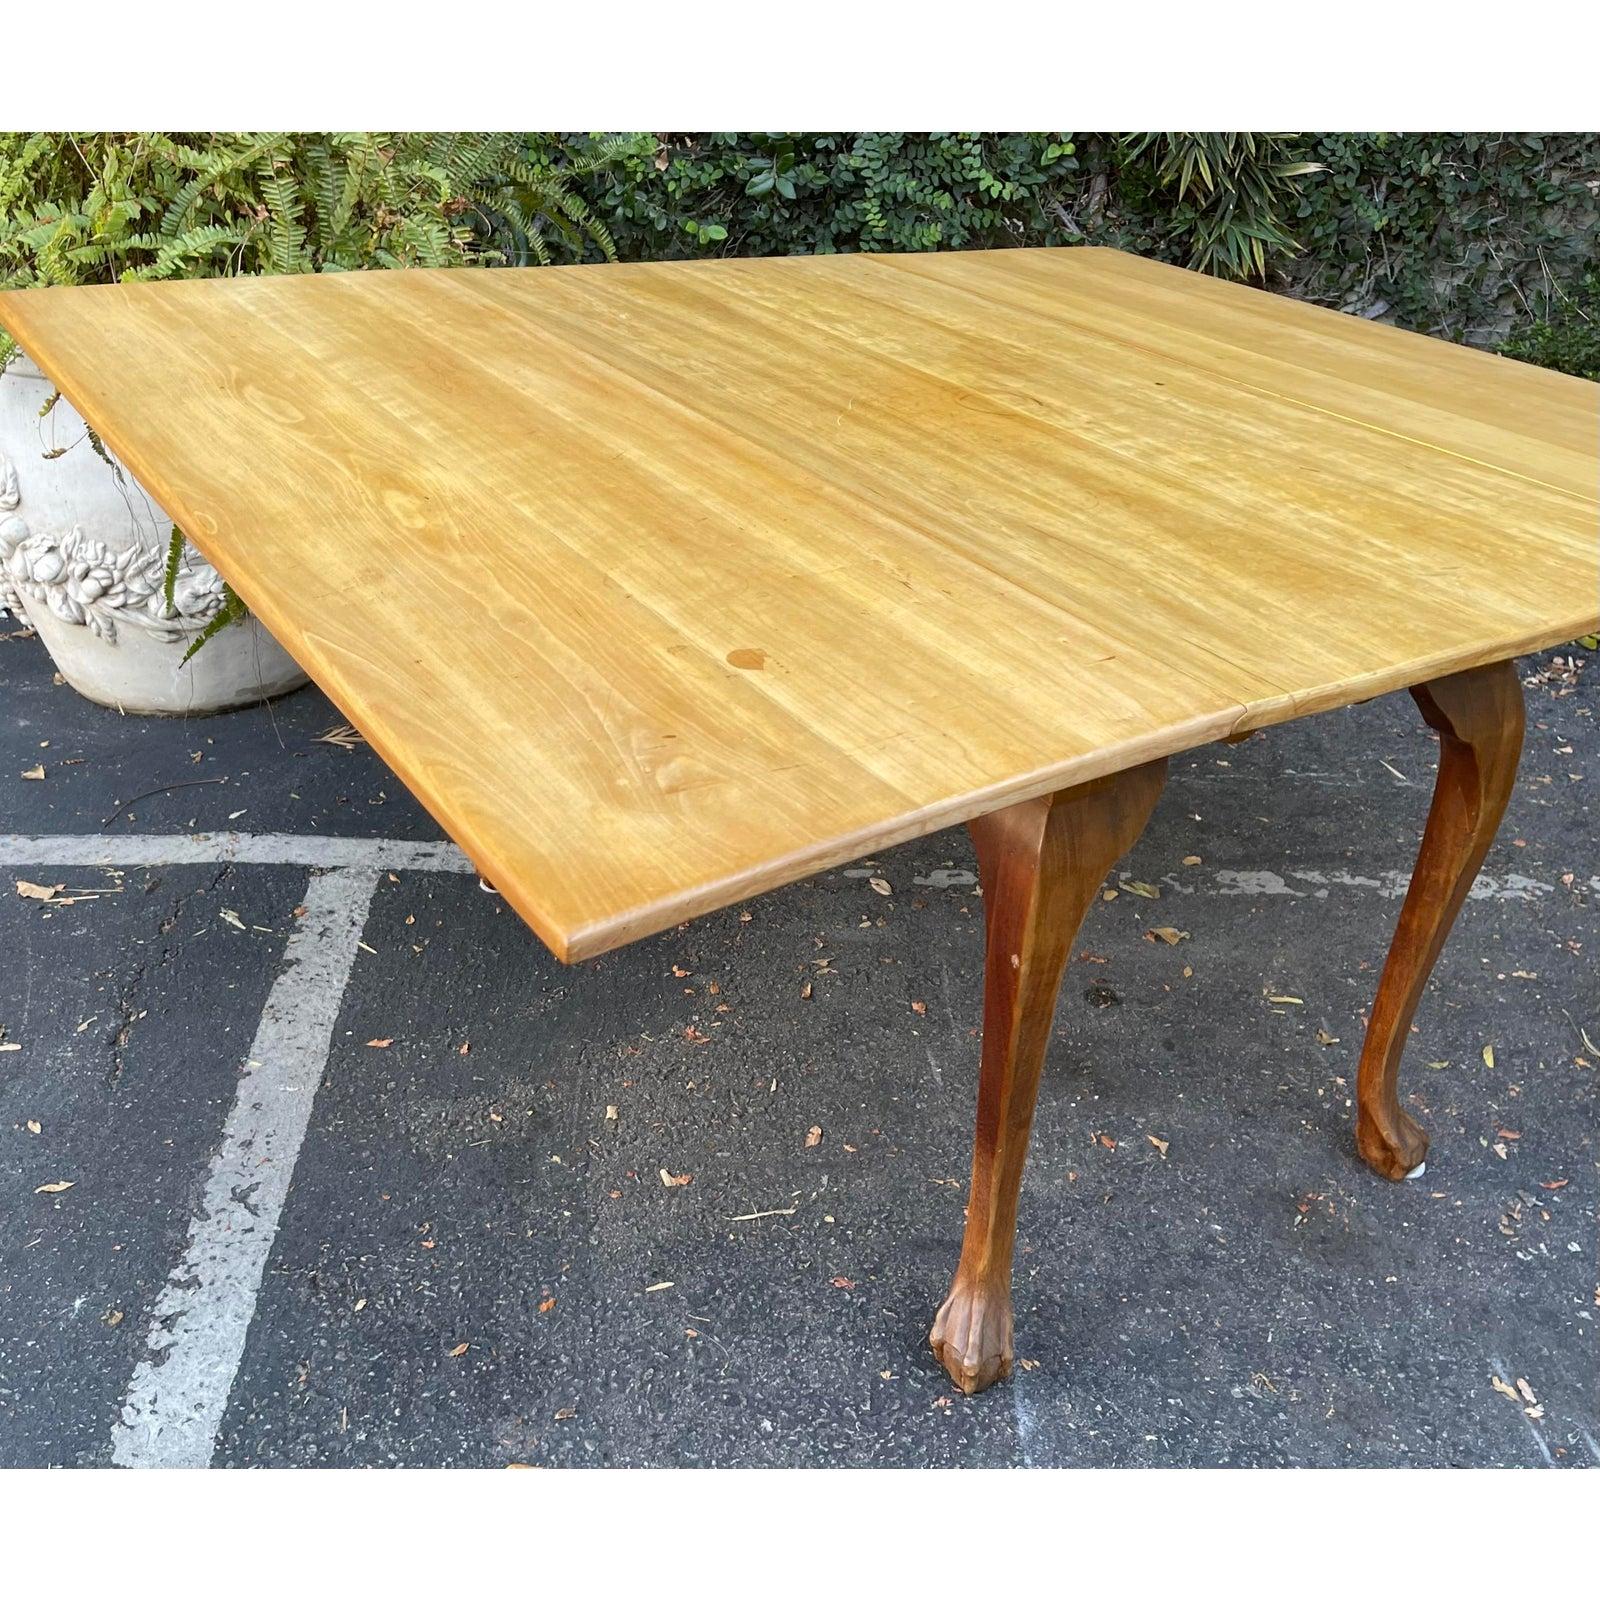 Antique 18th C English Bleached Mahogany Drop Leaf Dining Table.
Opens to 74” wide.

Additional information:
Materials: mahogany
Please note that this item contains materials that are legally subject to a special export process that may extend